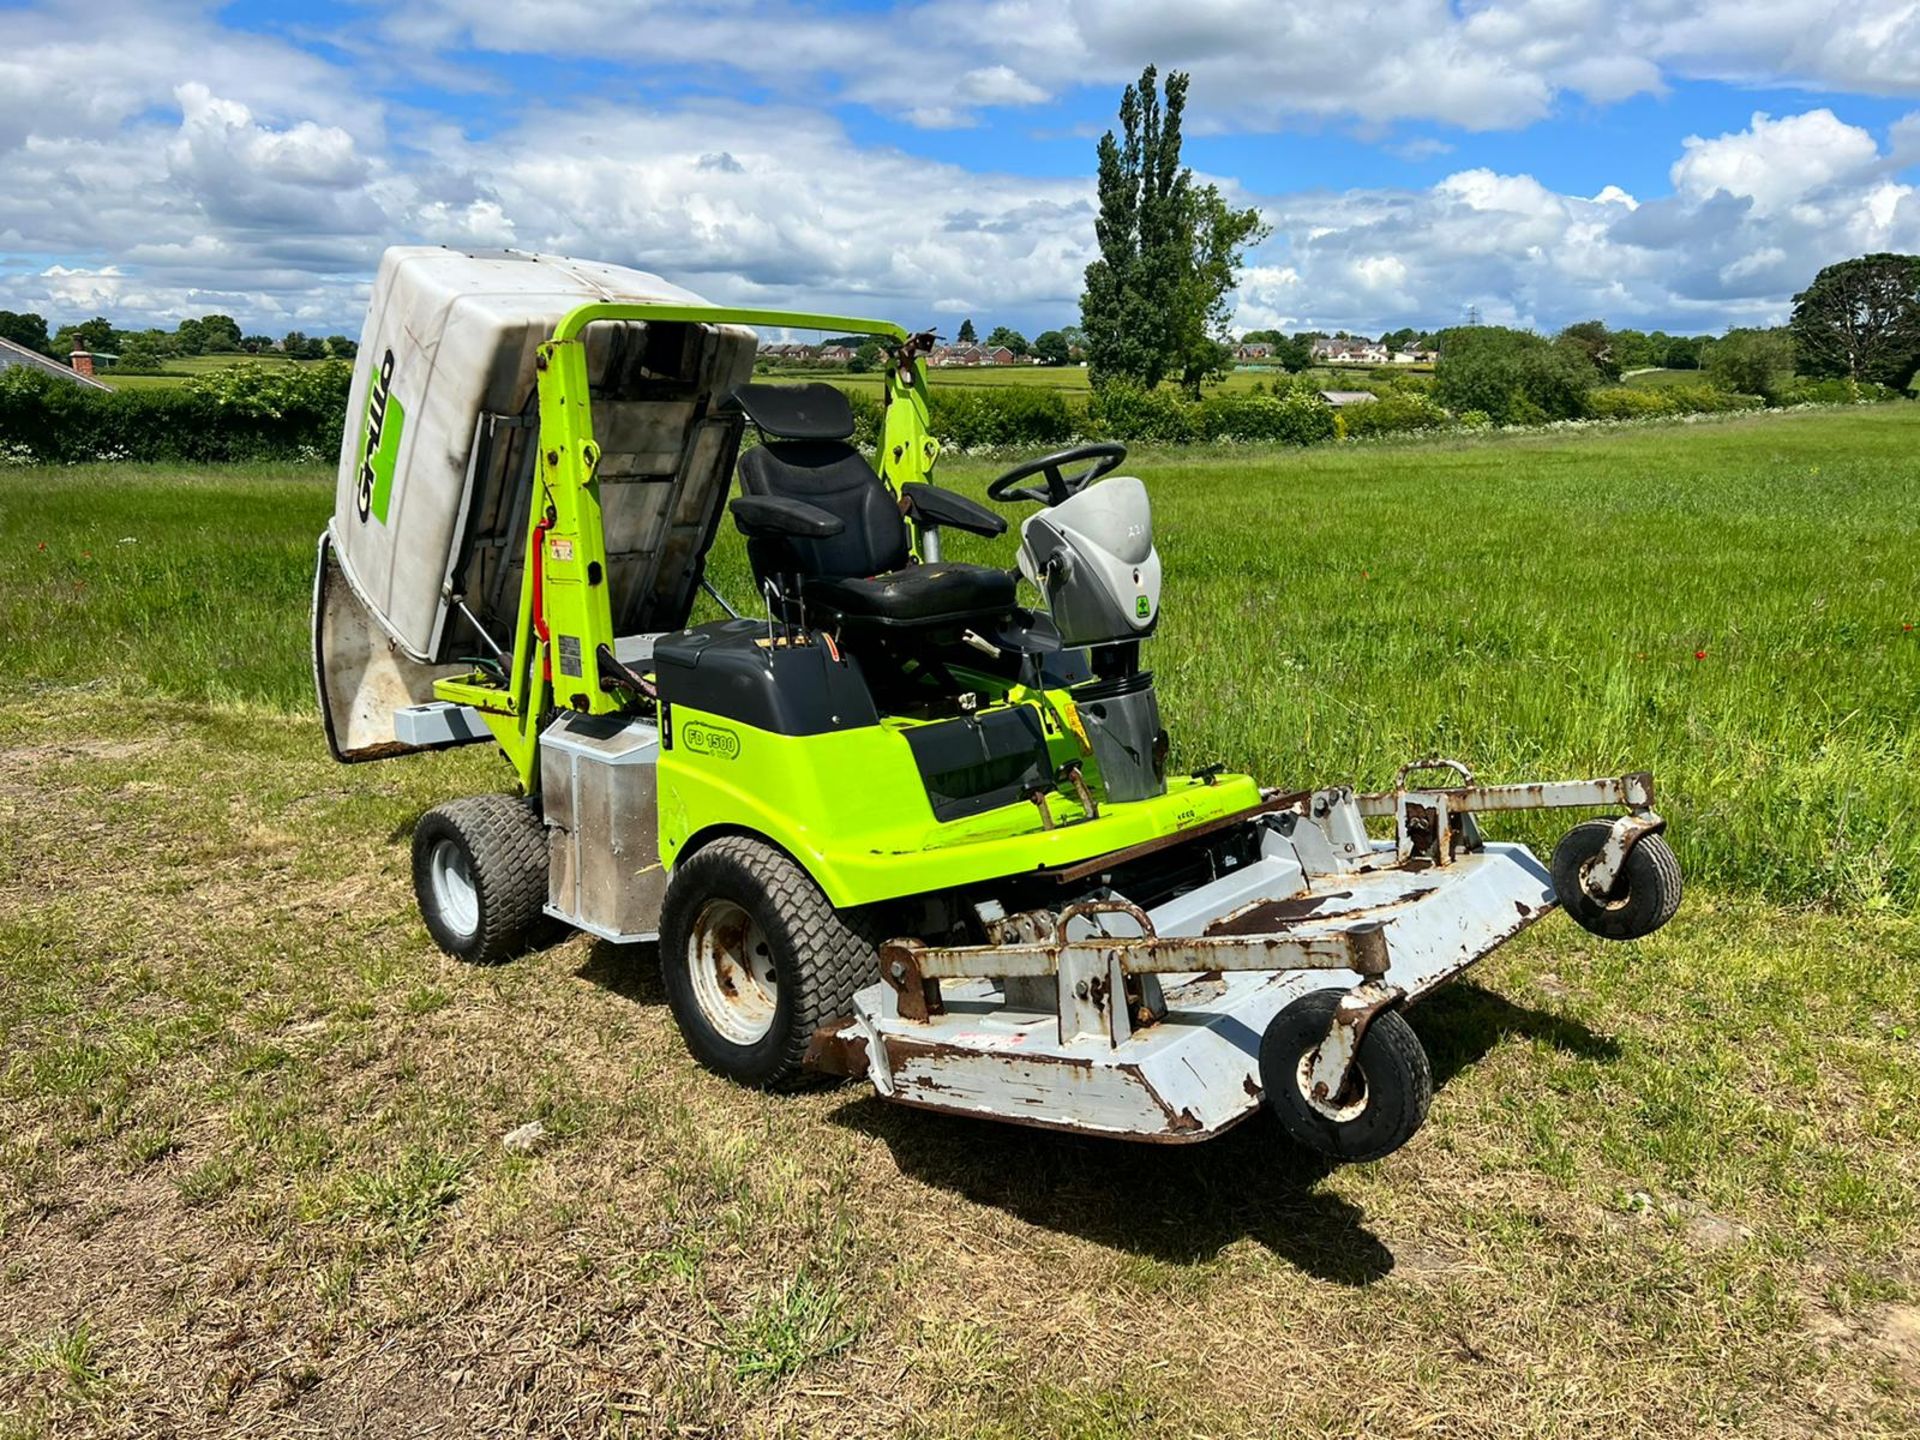 GRILLO FD1500 RIDE ON LAWN MOWER WITH HIGH LIFT COLLECTOR, RUNS DRIVES AND CUTS *PLUS VAT* - Image 2 of 10